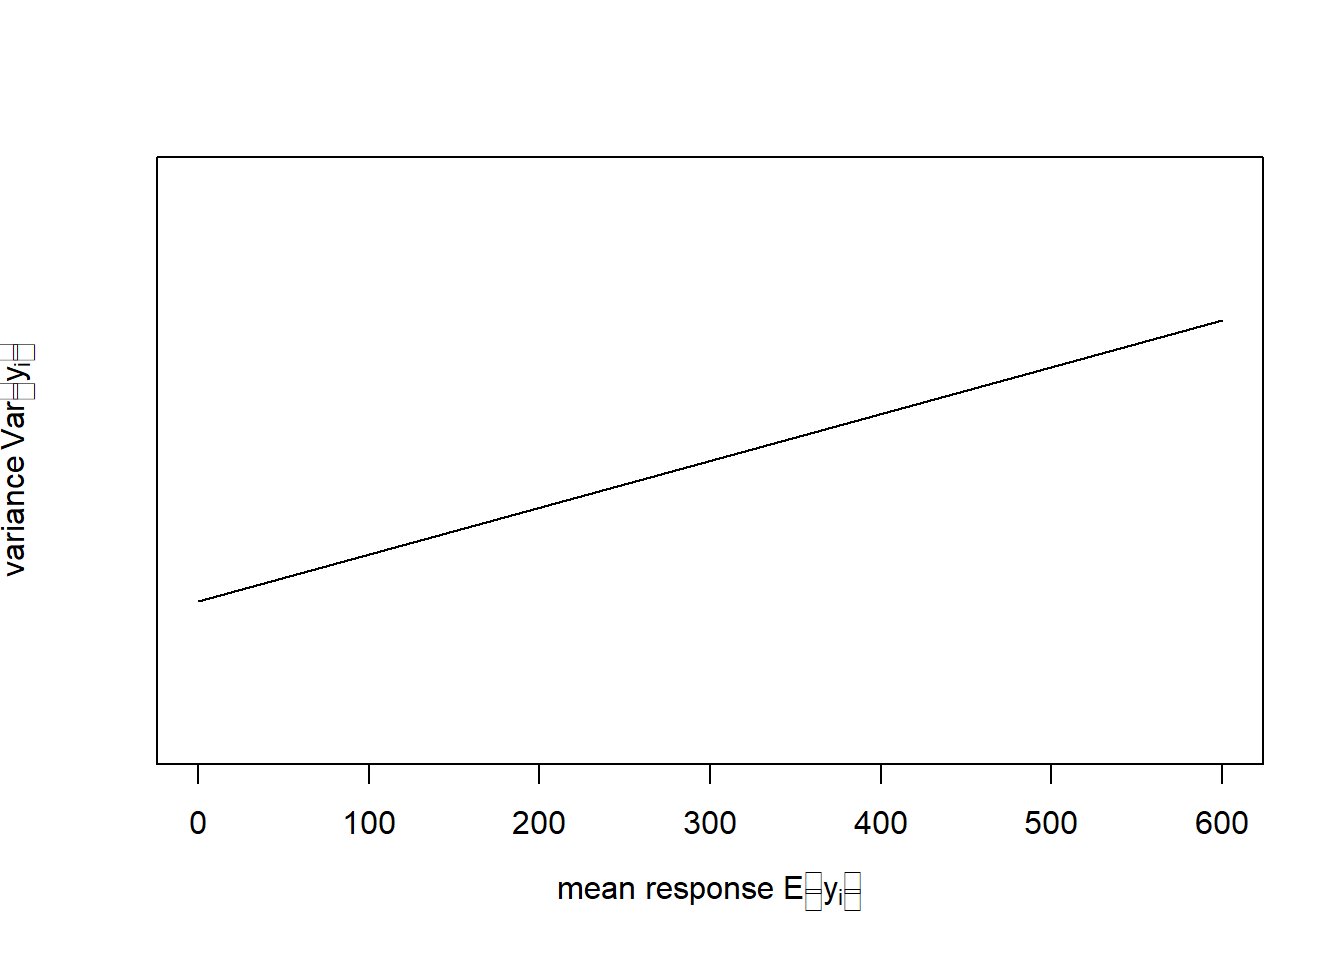 Left: Number of bird species as a function of average relief. Data from: @piegorsch2005. Right: In this example the variance of $y$ increases with the mean response of $y$.